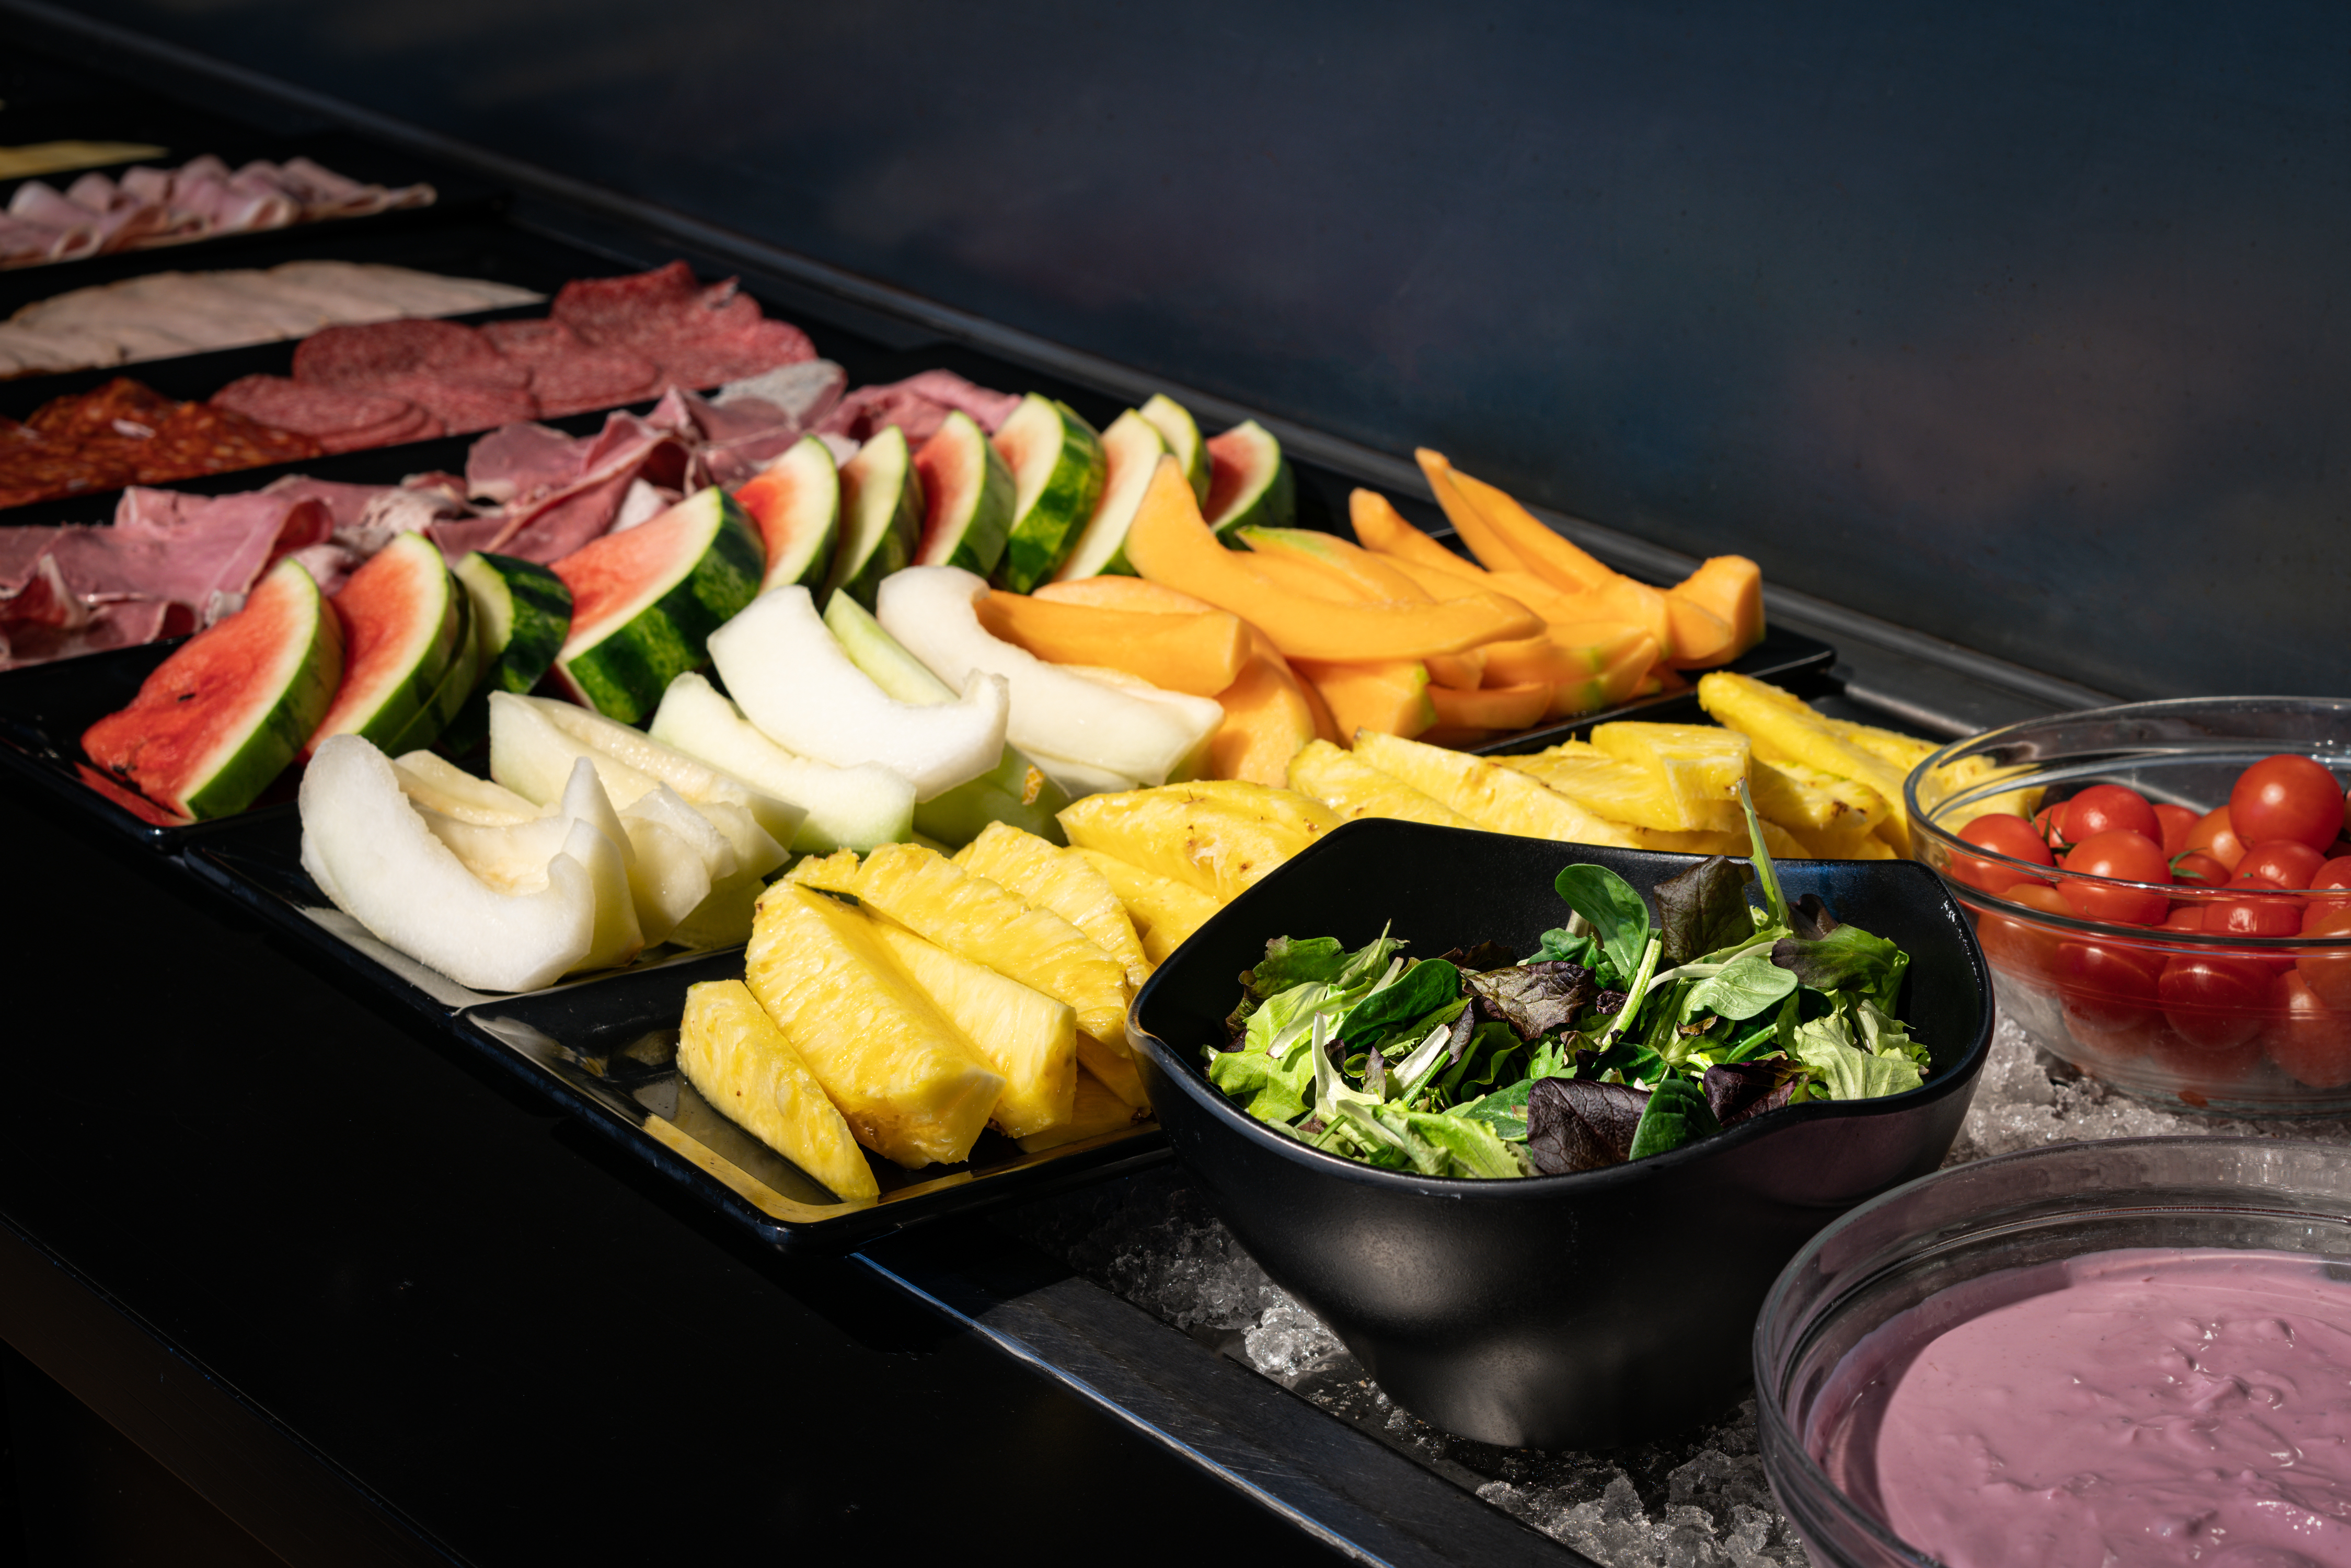 Breakfast Bar with Fresh Fruits, Cold Cuts and Vegetables